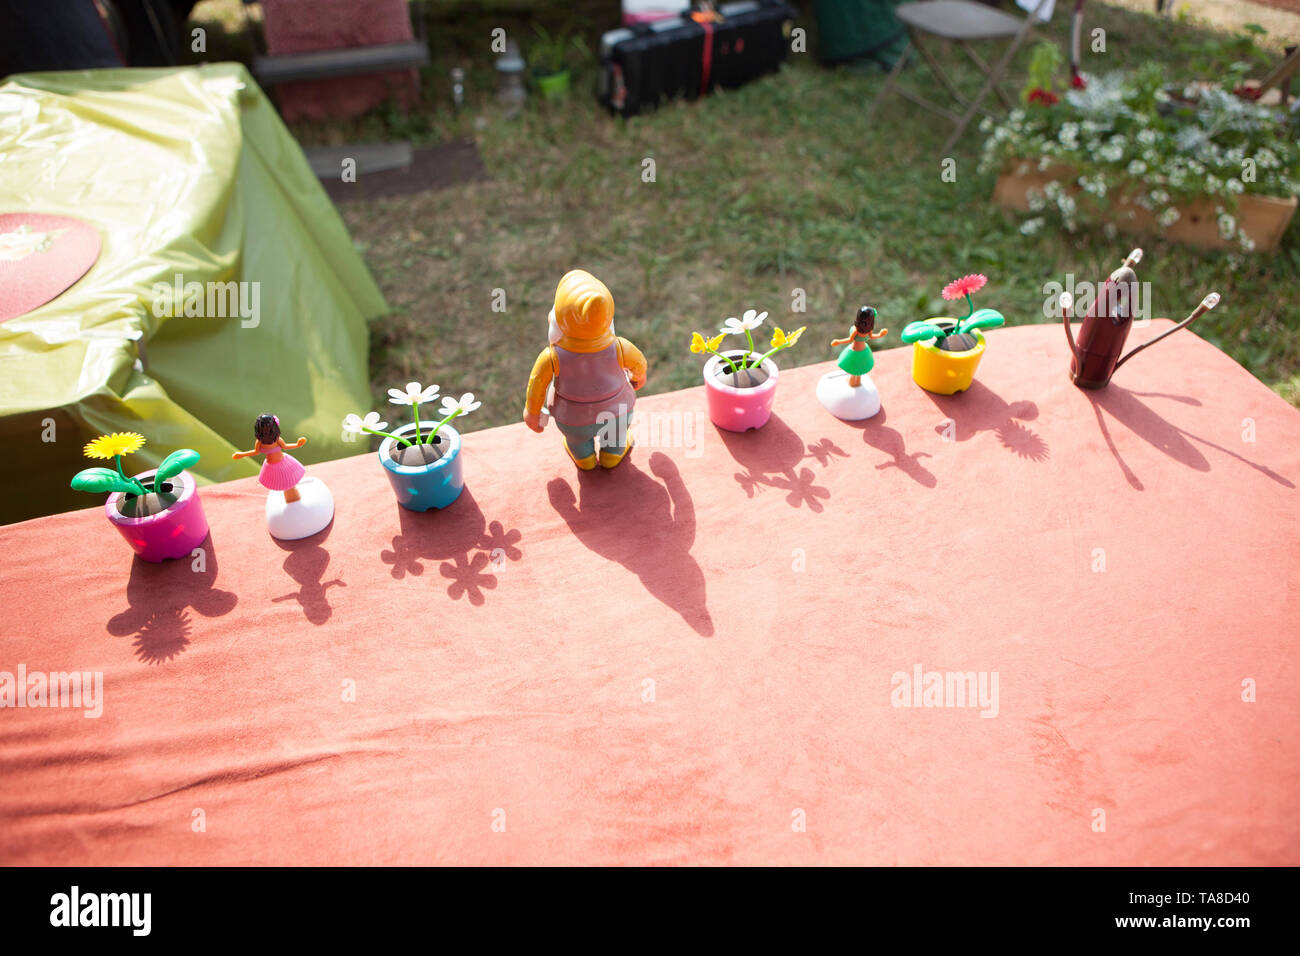 Rear View of Table Top Miniature Toys at Outdoor Event Stock Photo